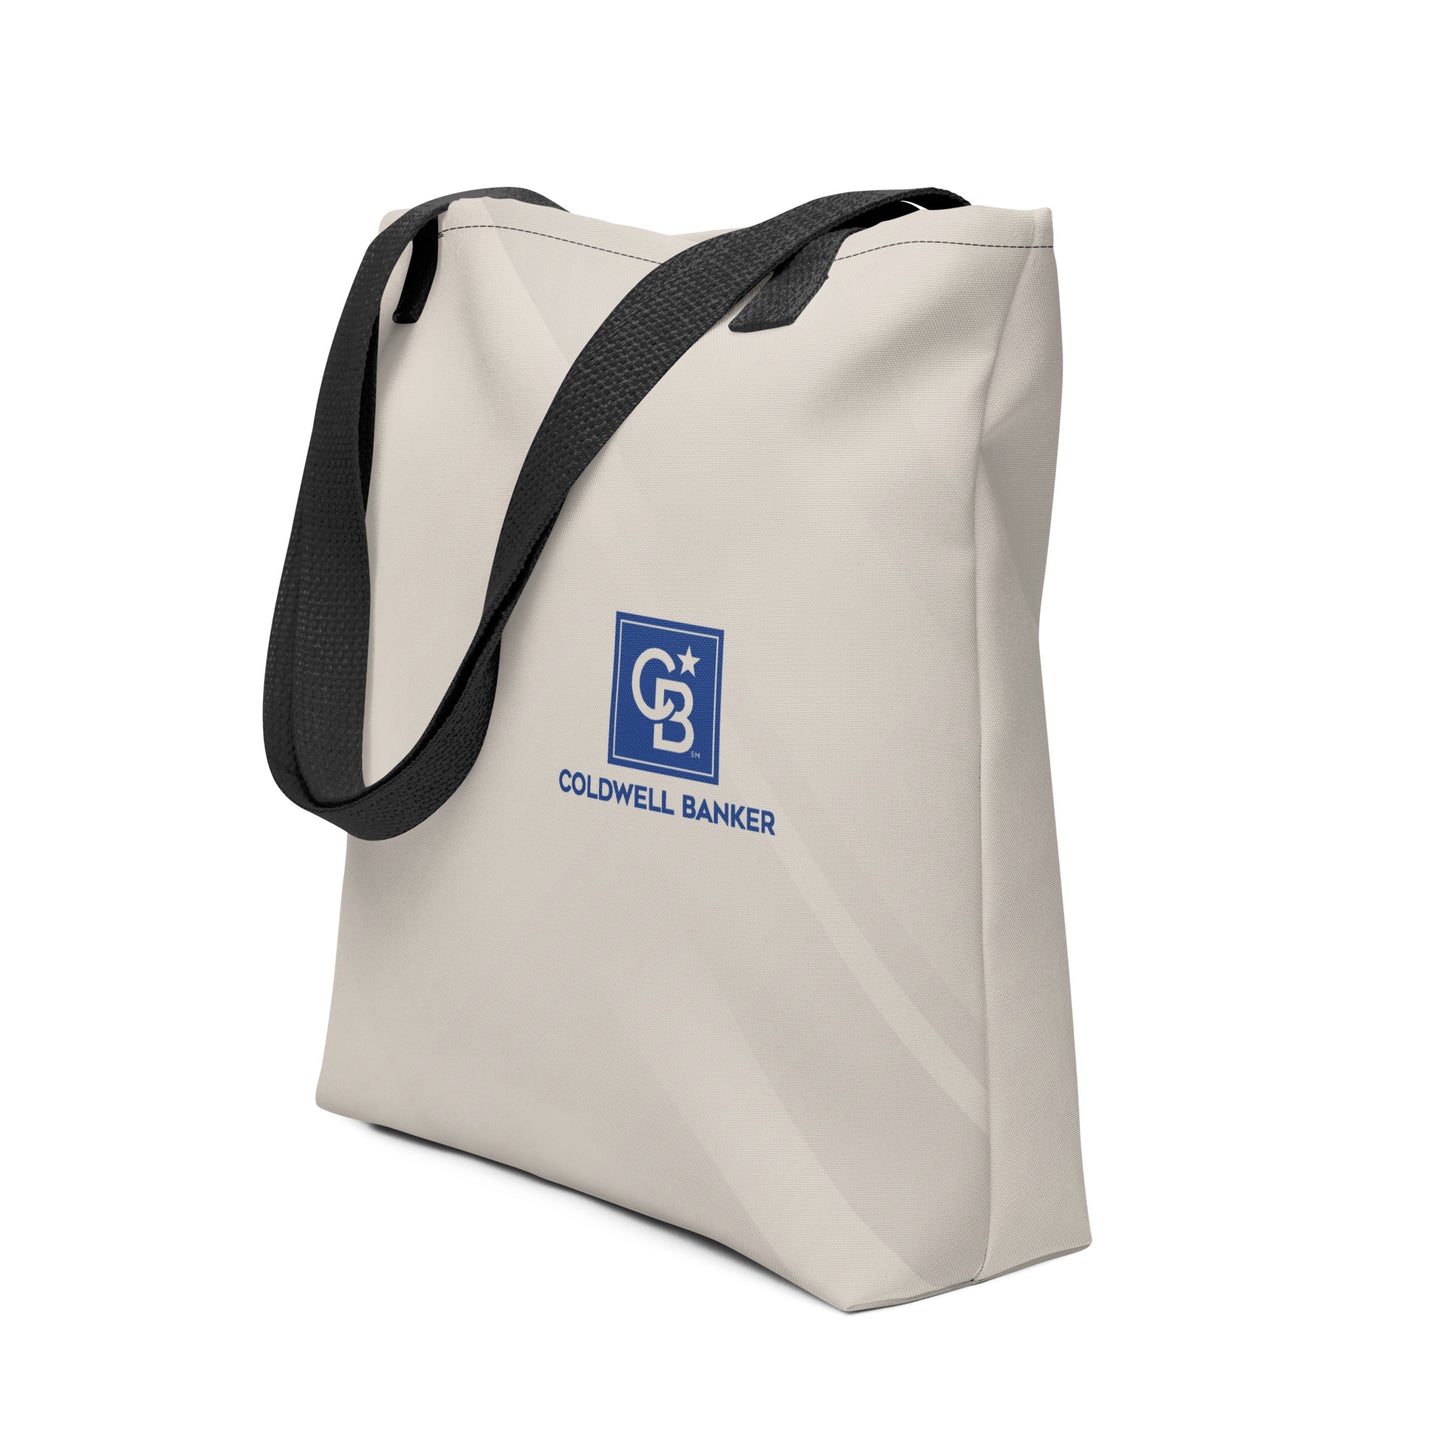 Coldwell Banker Tote bag Linen